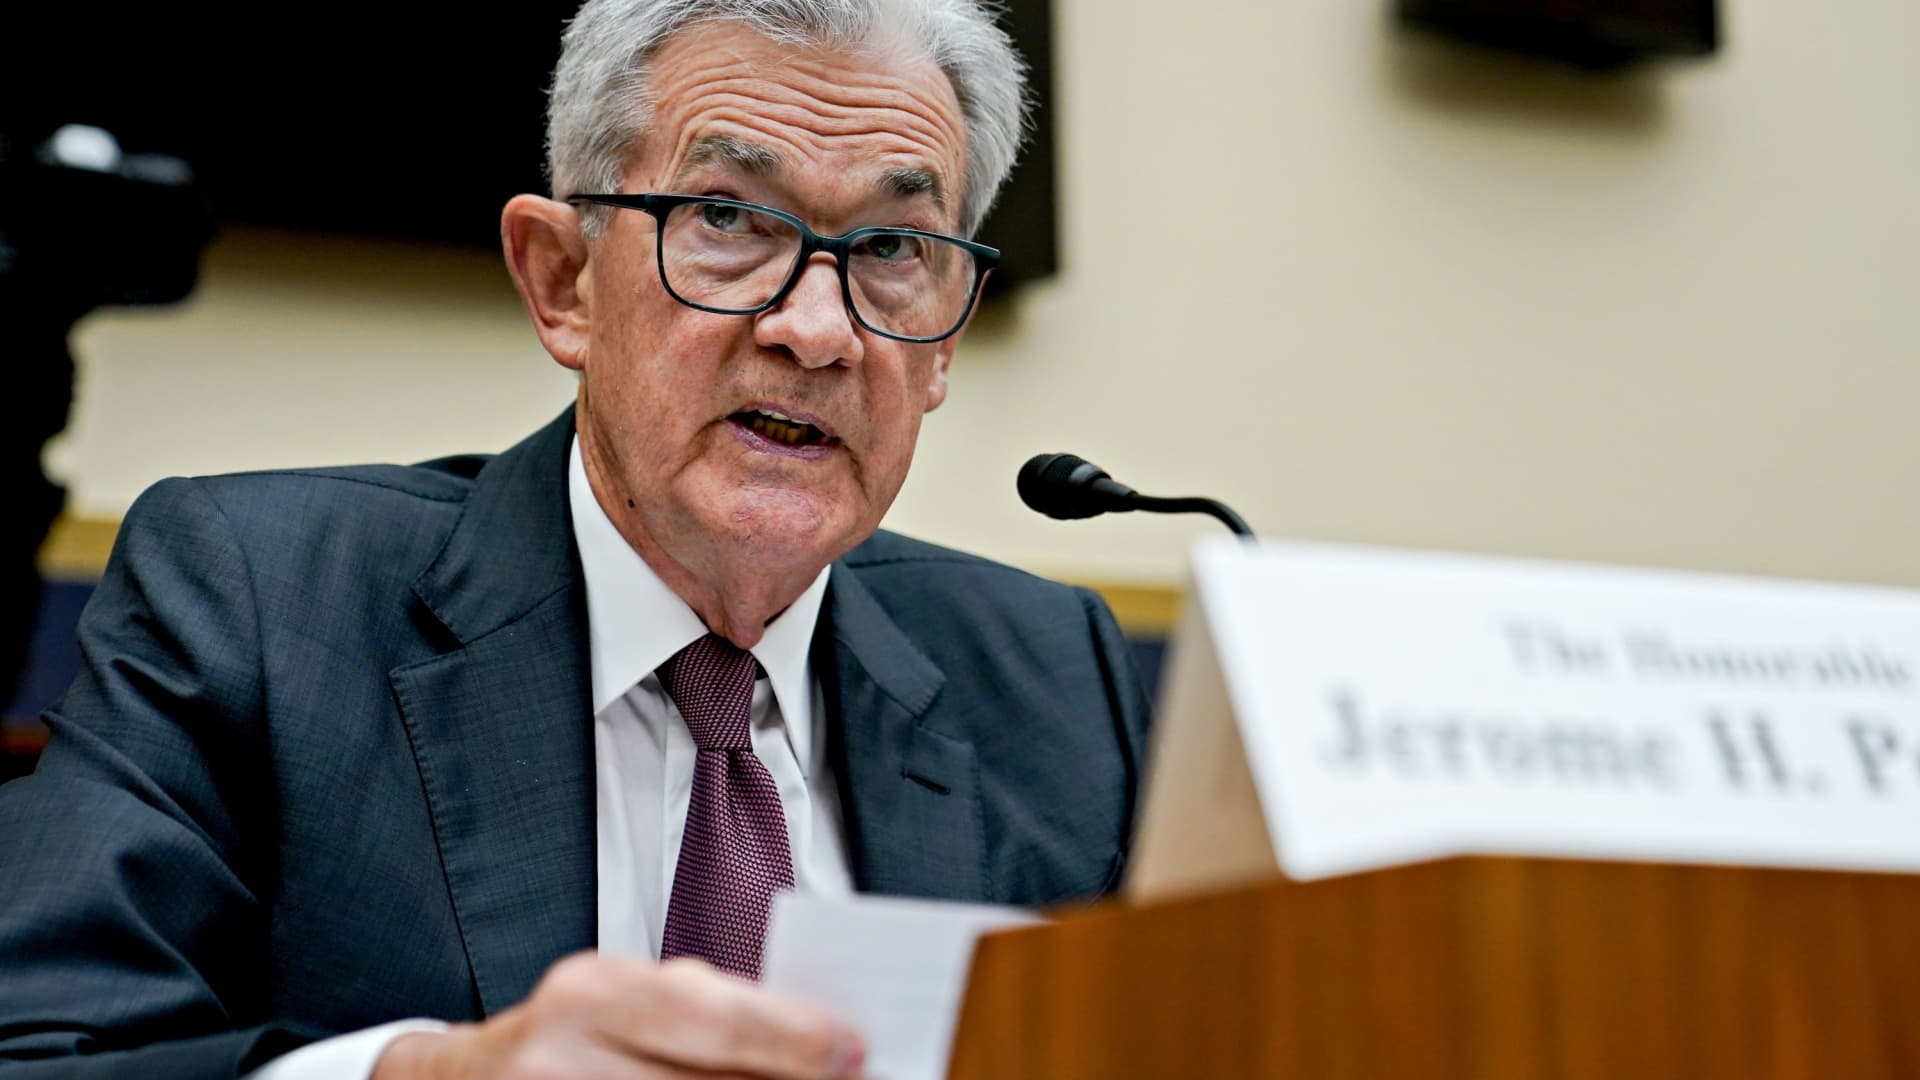 Investors on Edge as Powell Set to Address House Committee: What to Expect